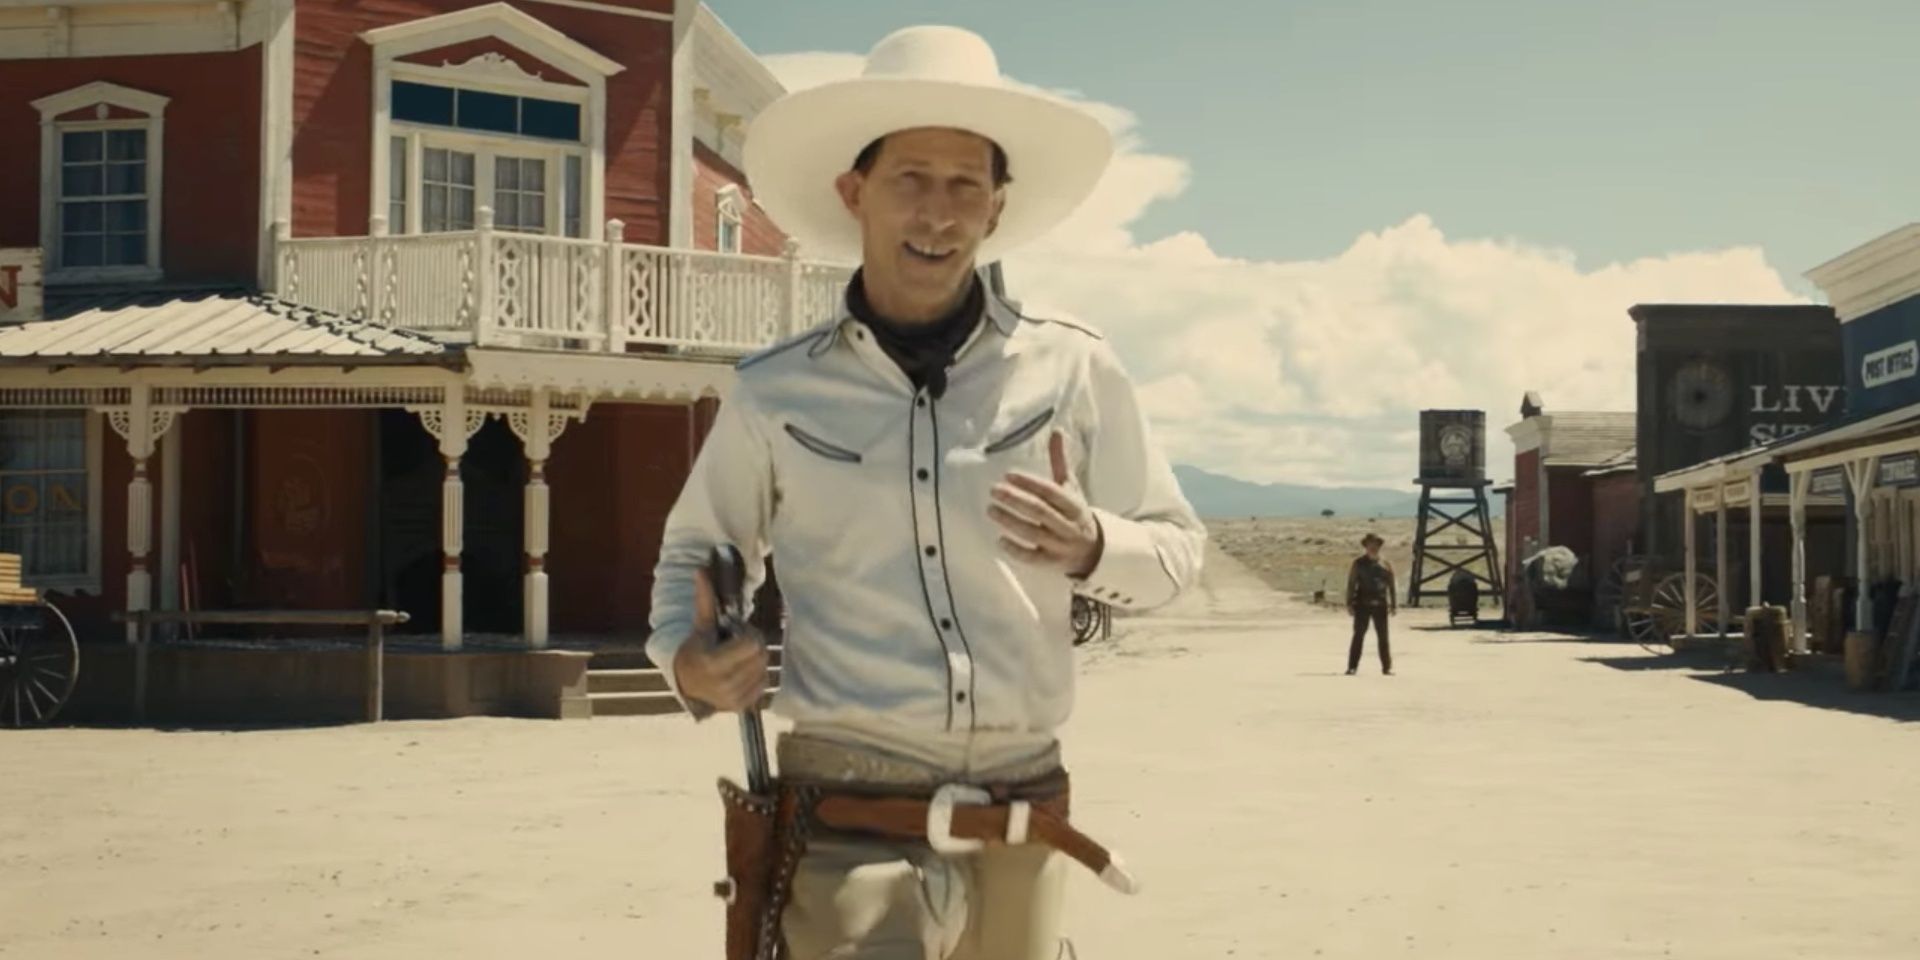 Tim Blake Nelson as Buster Scruggs holsters a pistol in The Ballad of Buster Scruggs